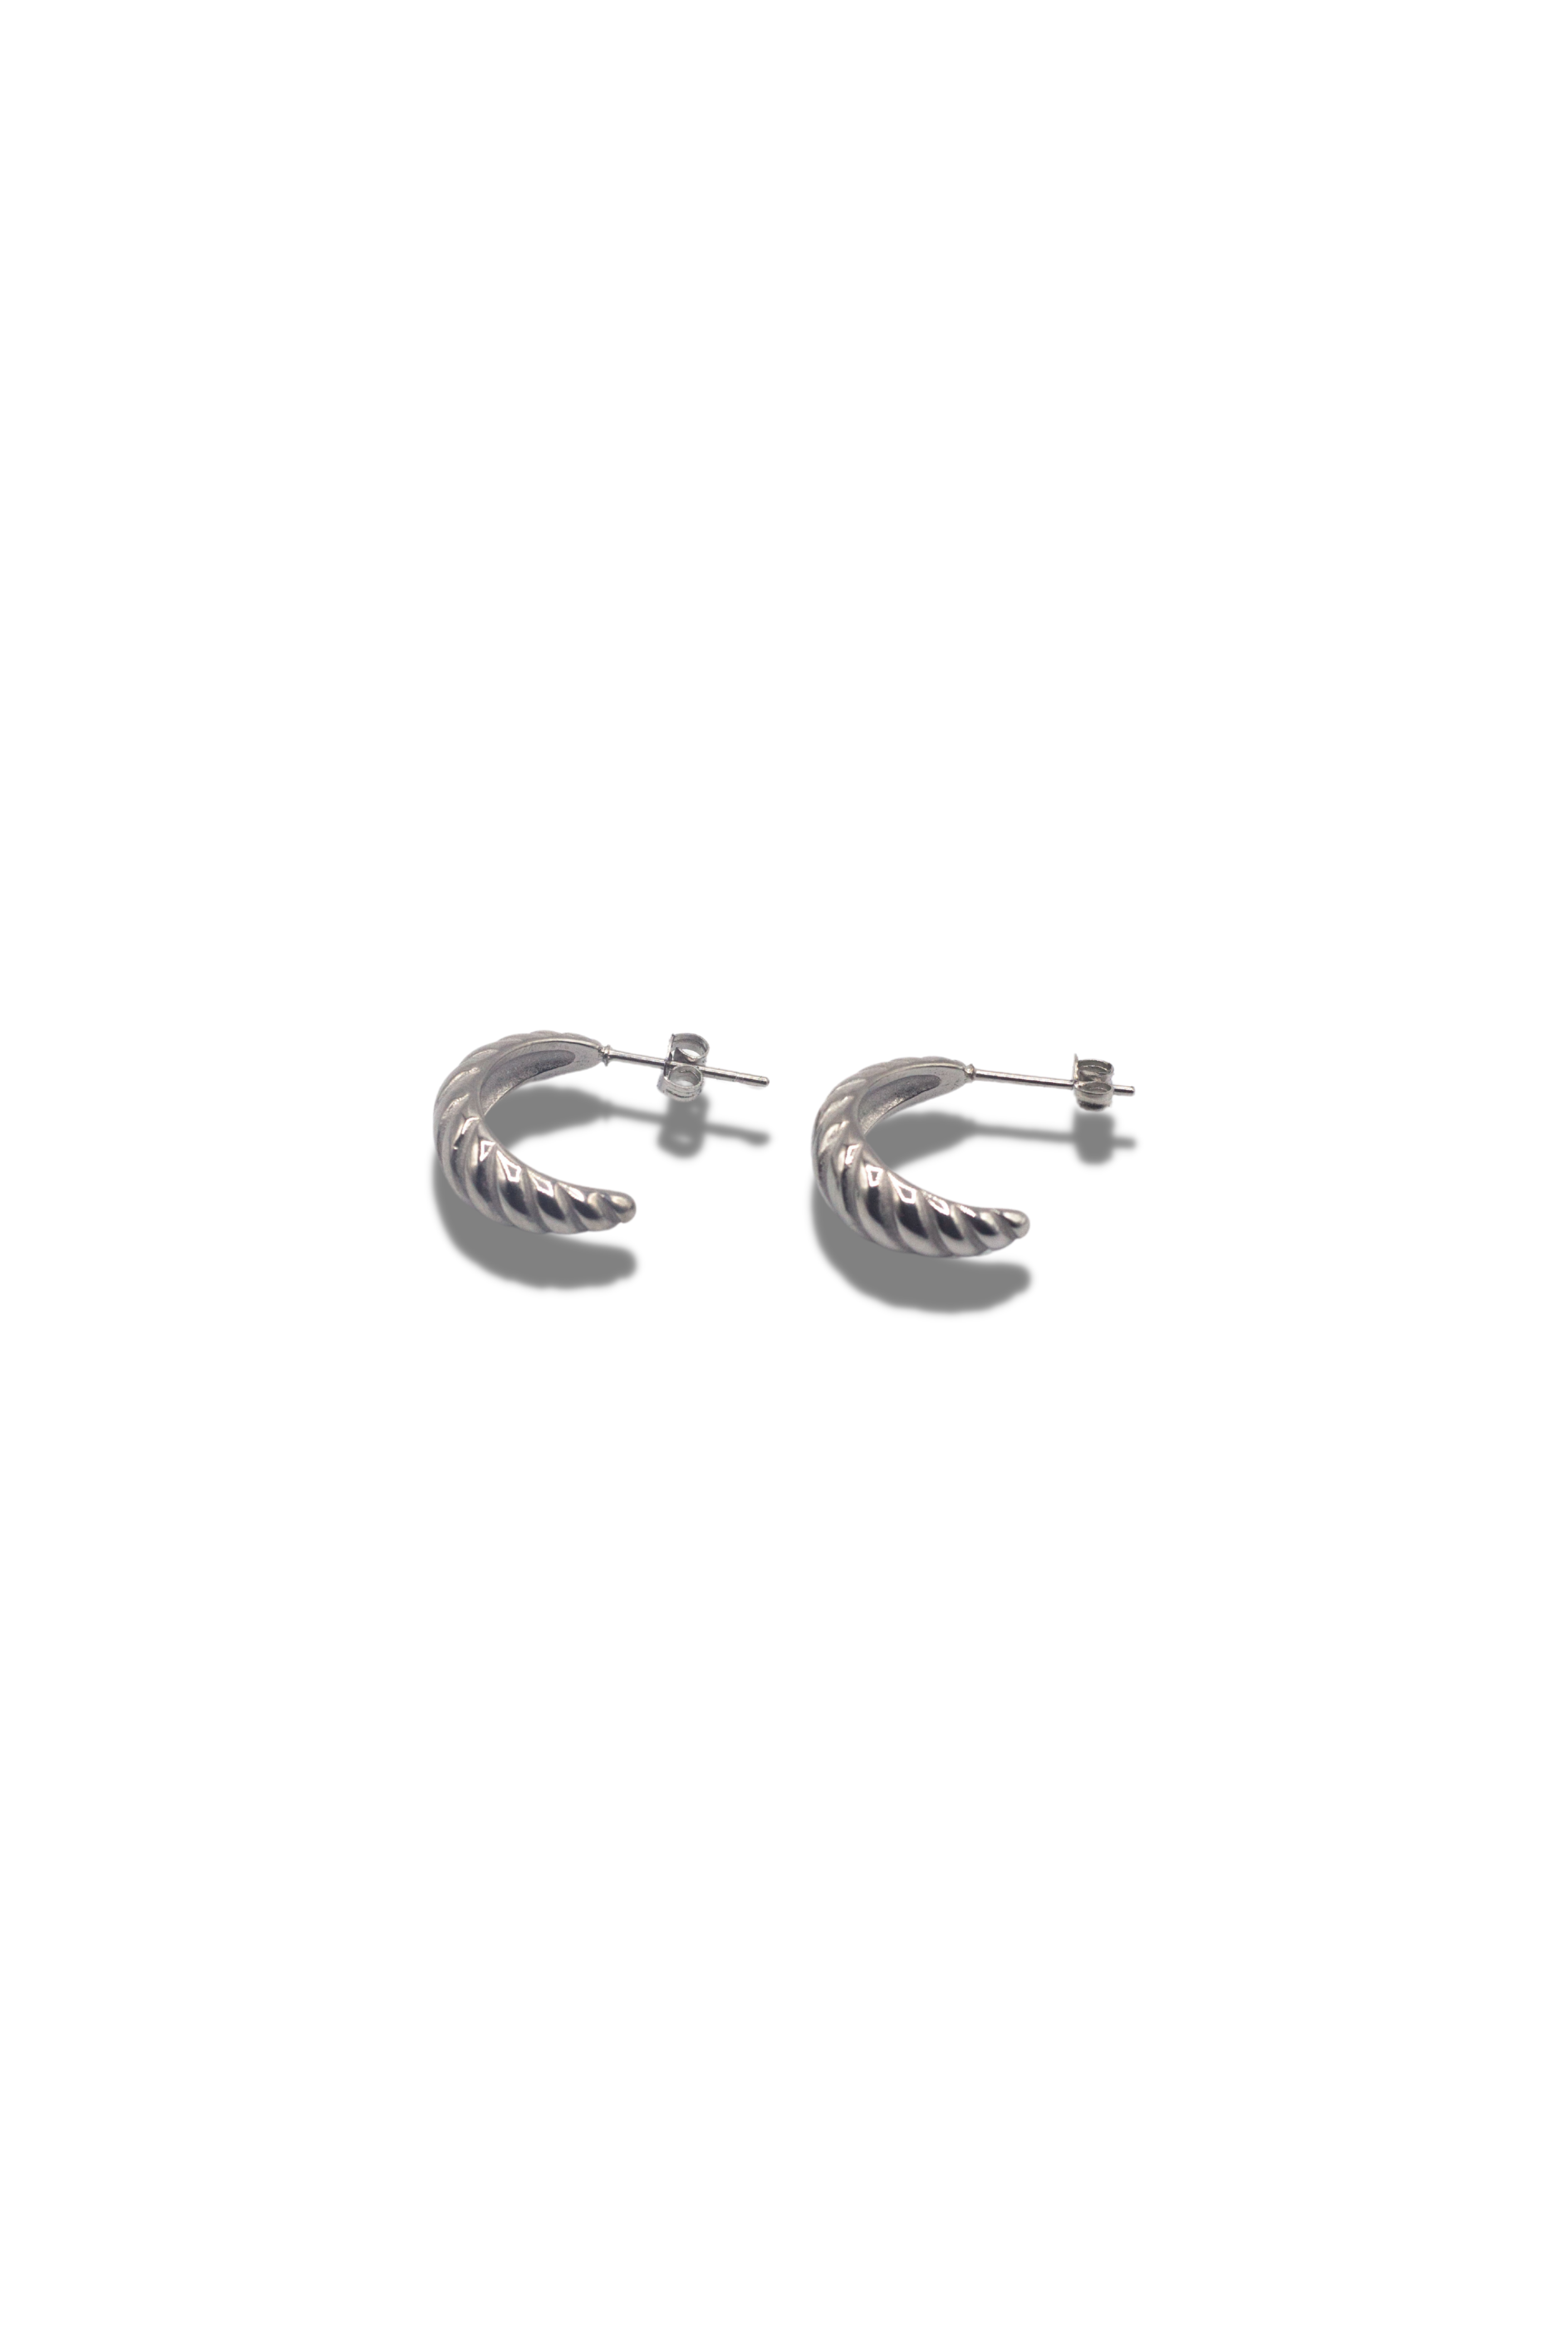 18k silver croissant shaped earrings. Thick Croissant Stud Earrings by E's Element.